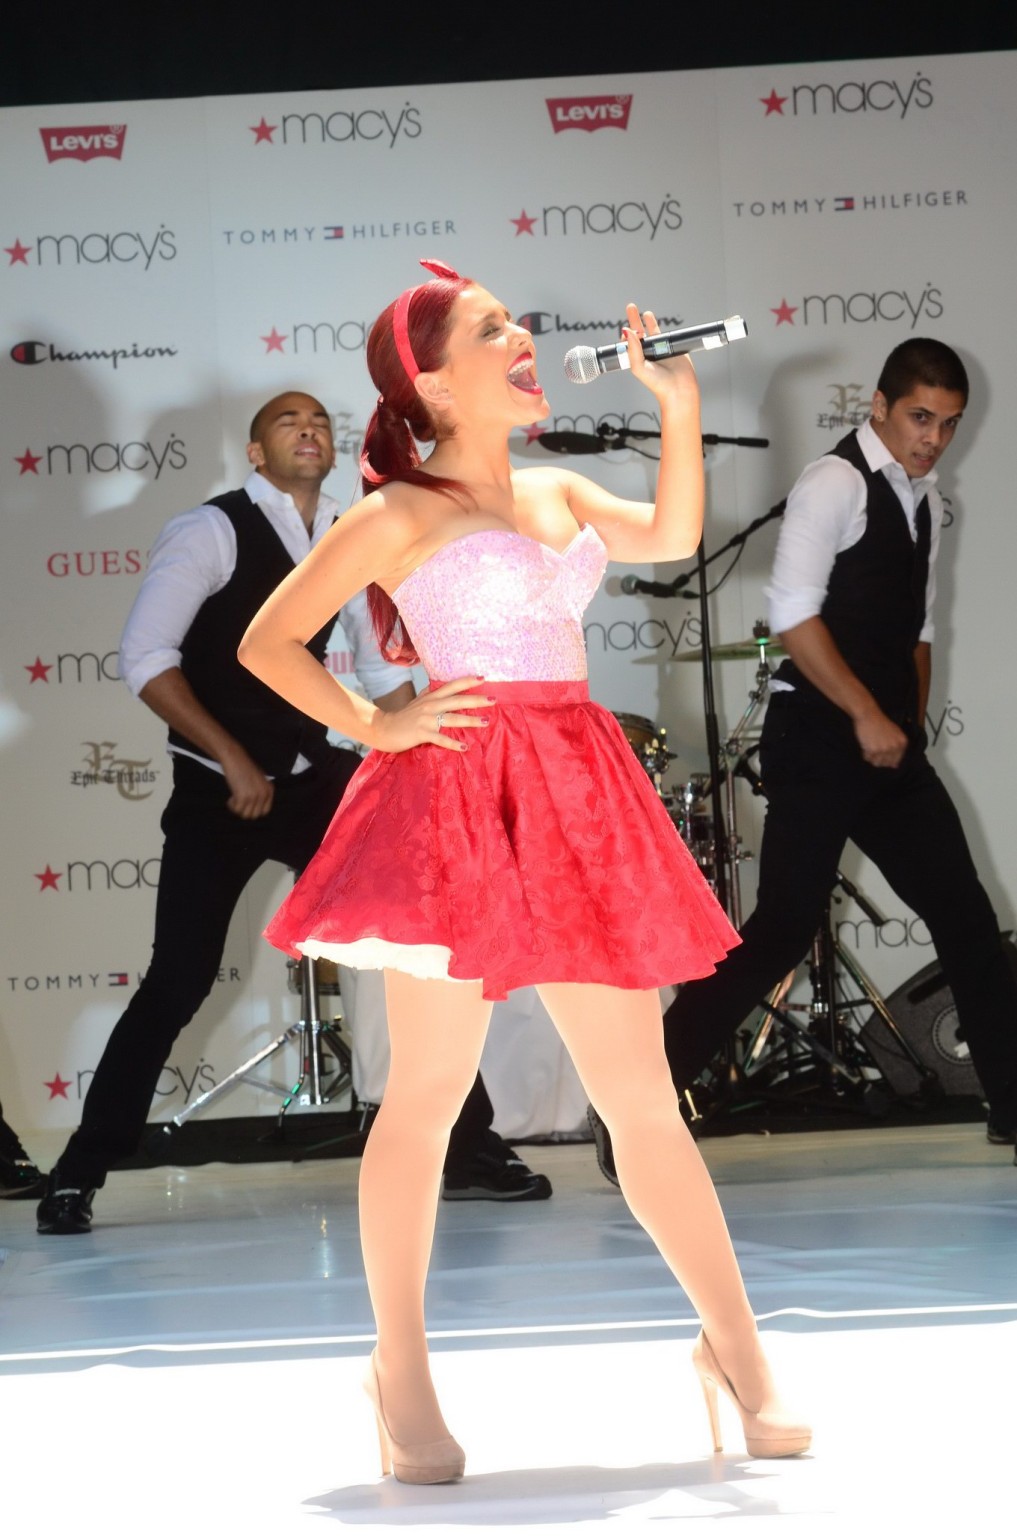 Ariana Grande flashing her panties at Macy's Annual Summer Blowout Show in NYC #75286858